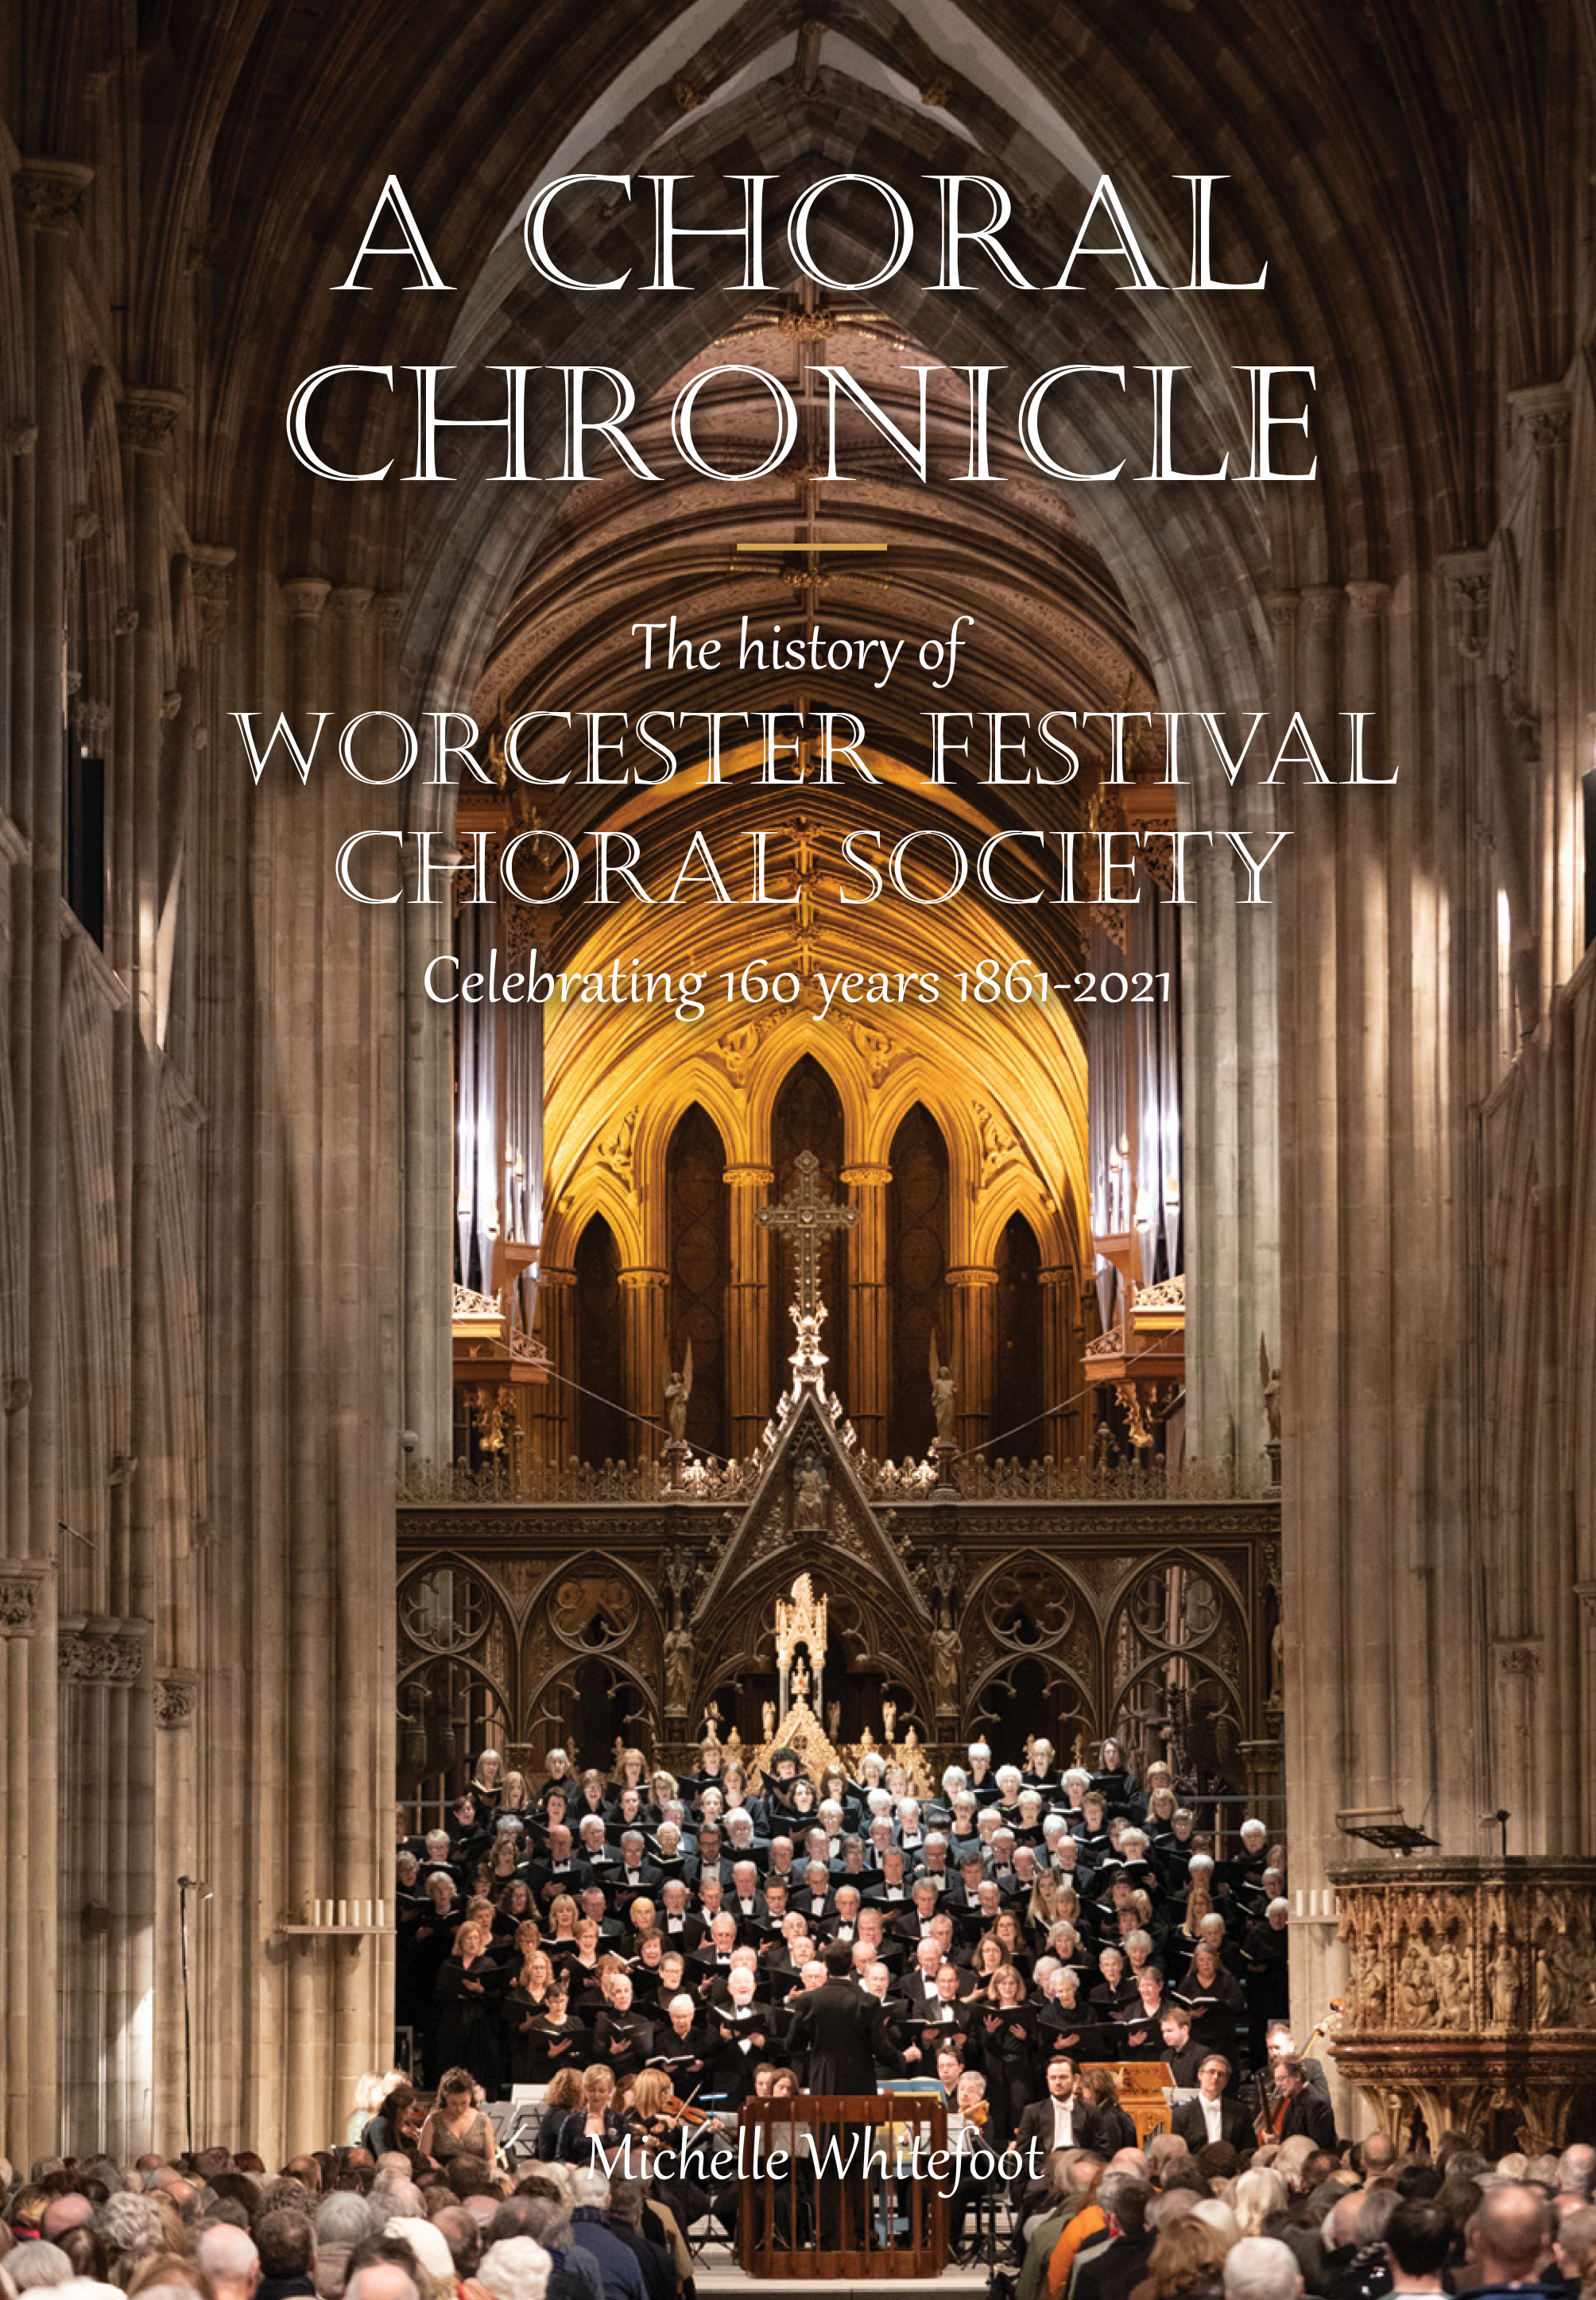 Michelle Whitefoot’s new book about the history of Worcester Festival Choral Society